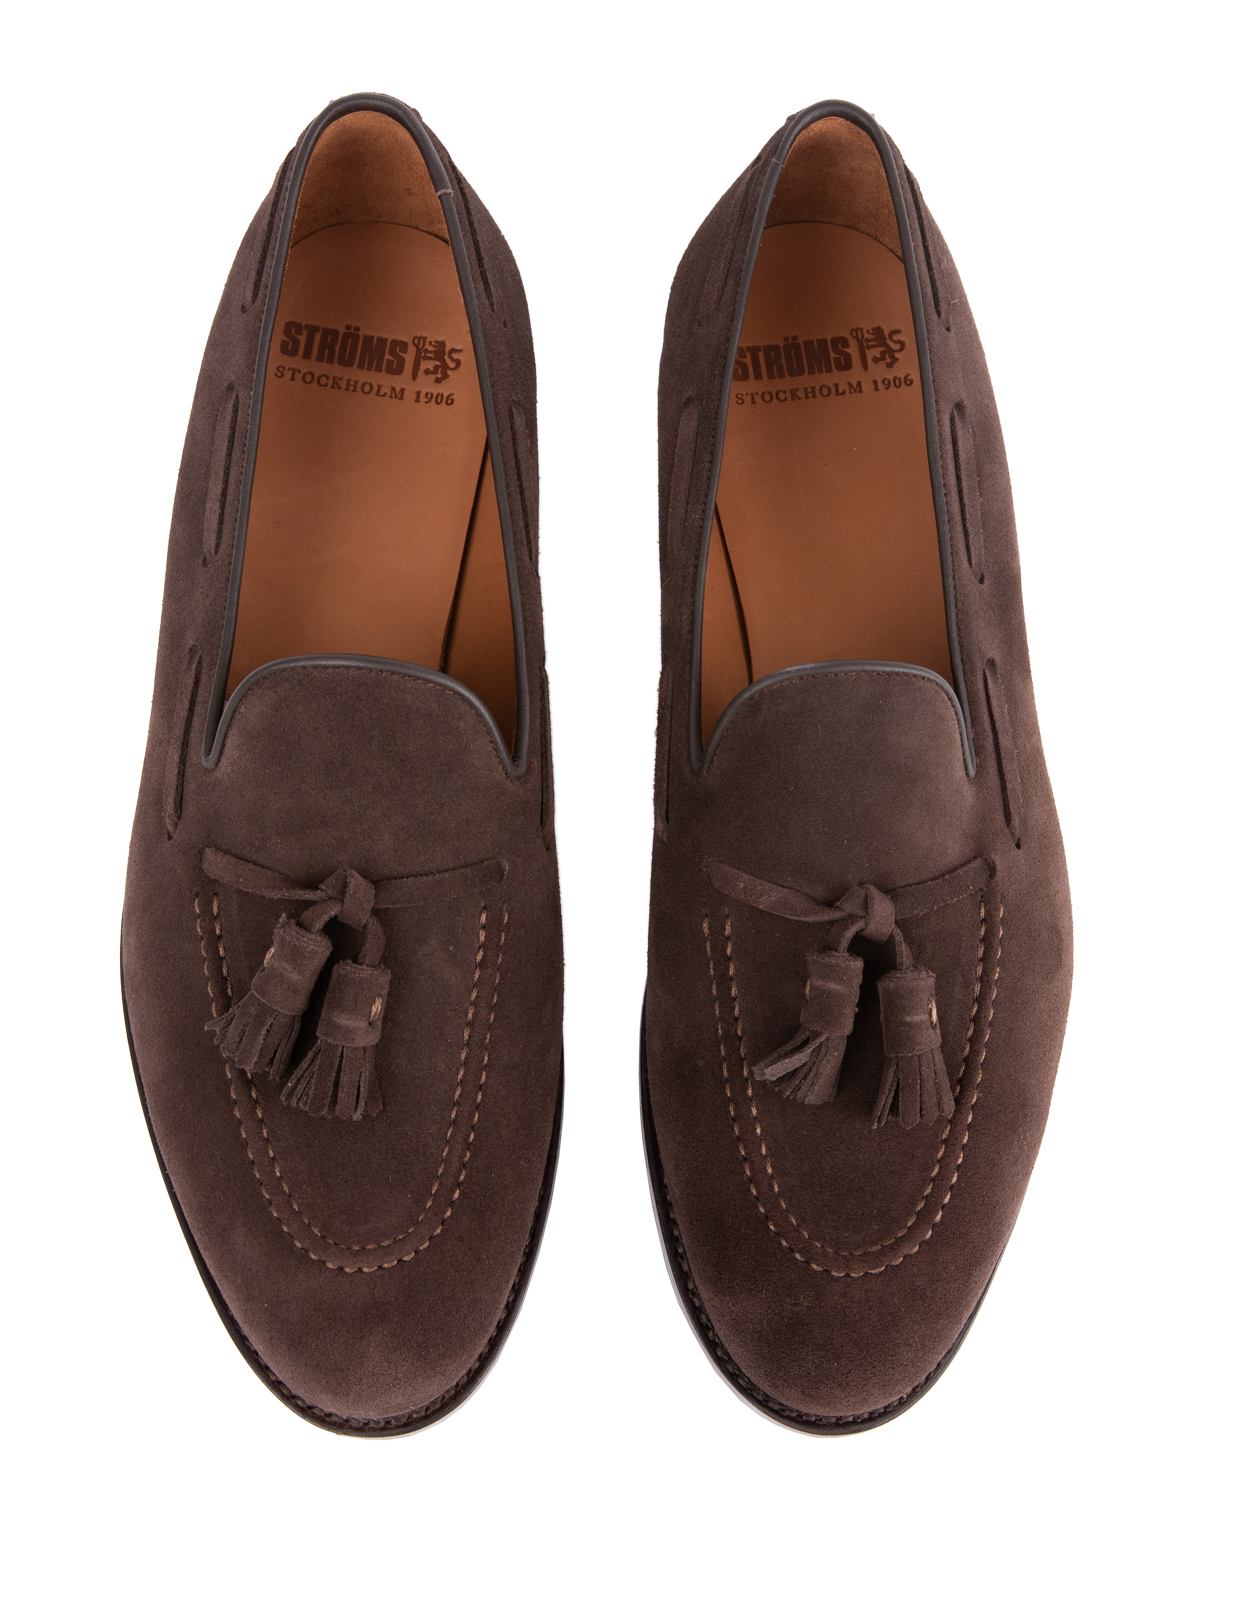 Tassel Loafers Suede Bitter Chocolate Stl 10